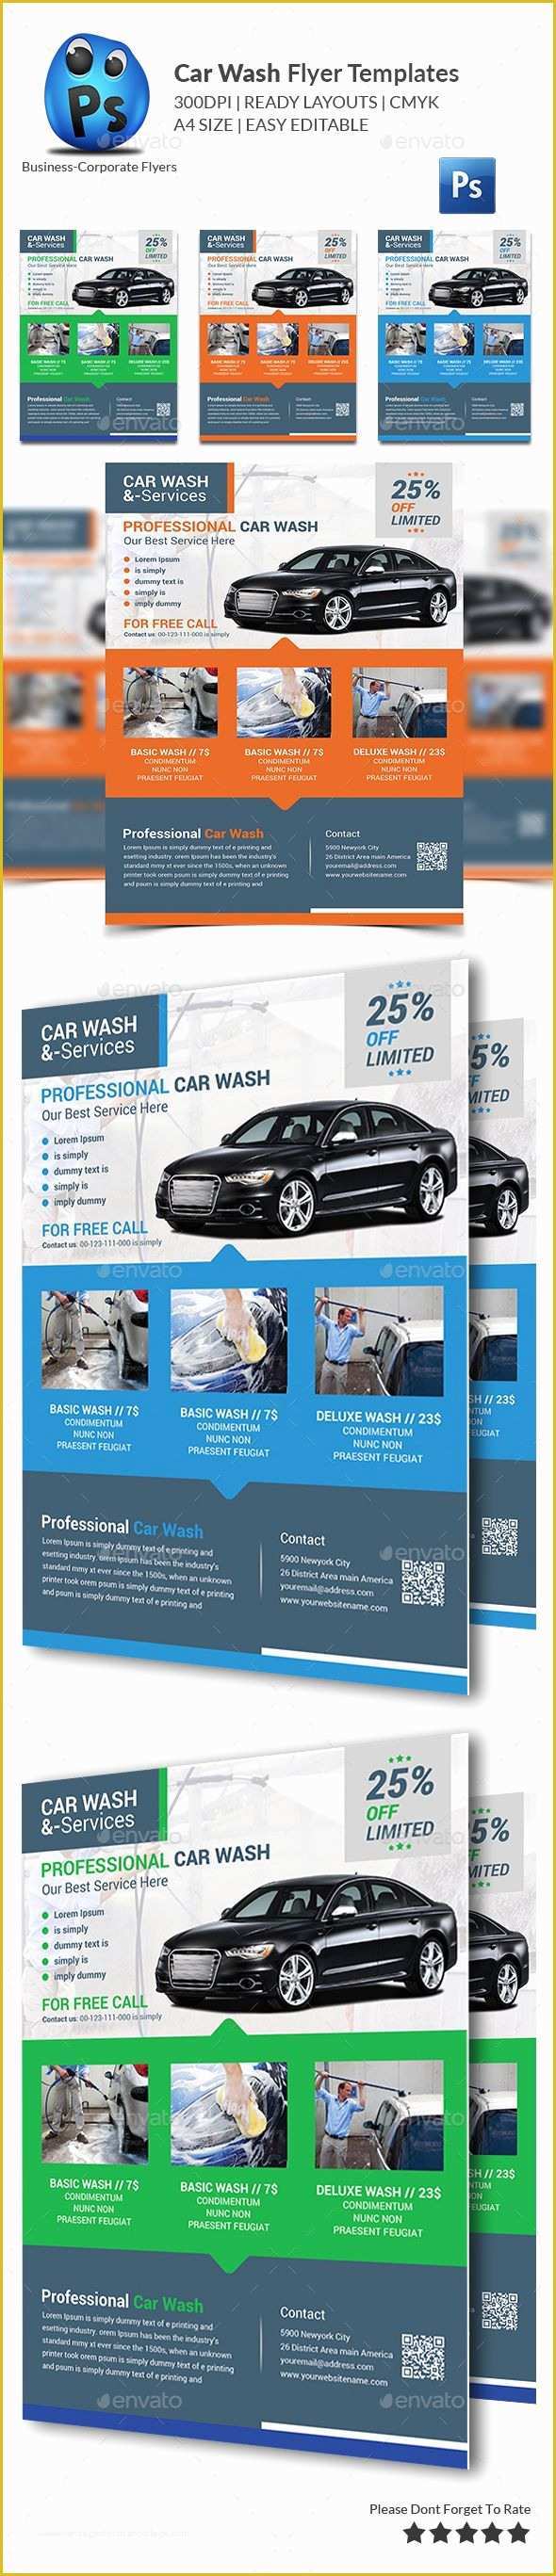 Car Wash Logo Template Free Of Car Wash Flyer Templates Corporate Flyers